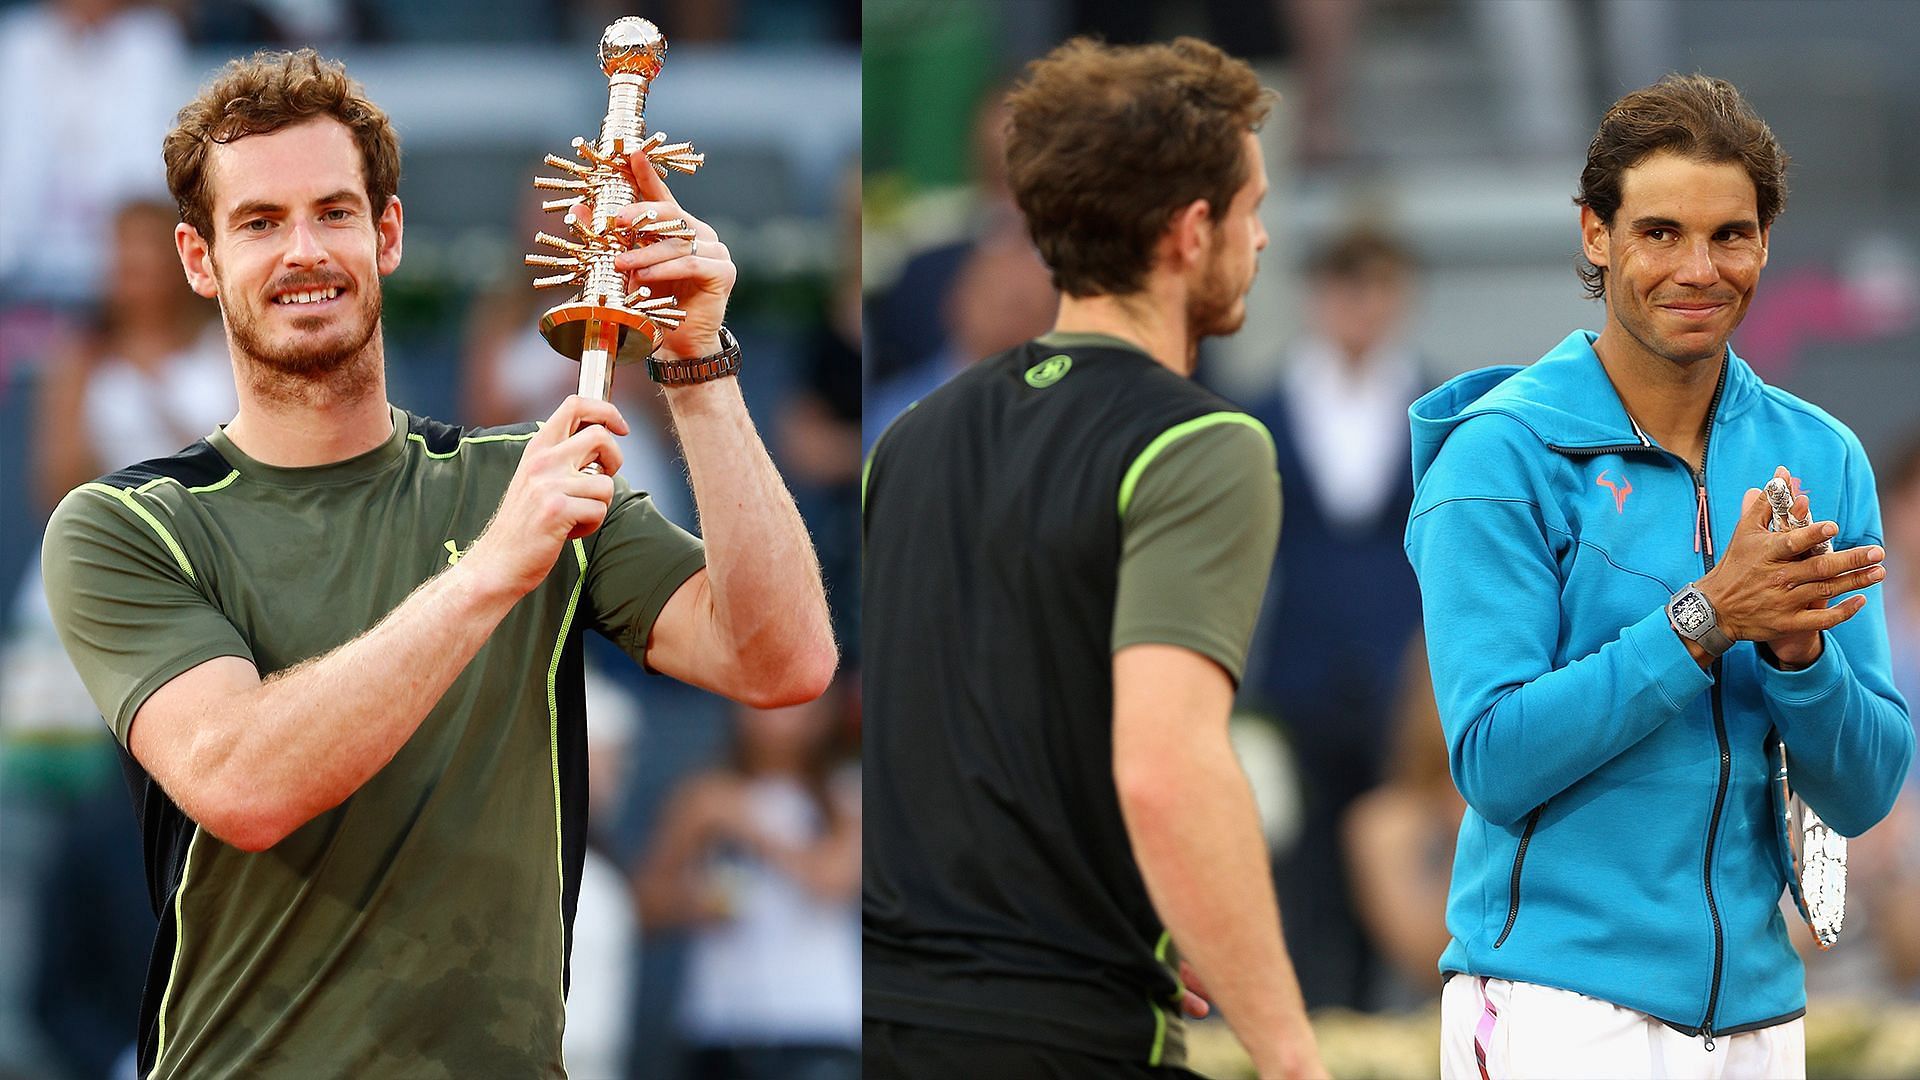 Andy Murray defeated Rafael Nadal in the Madrid Open 2015 final